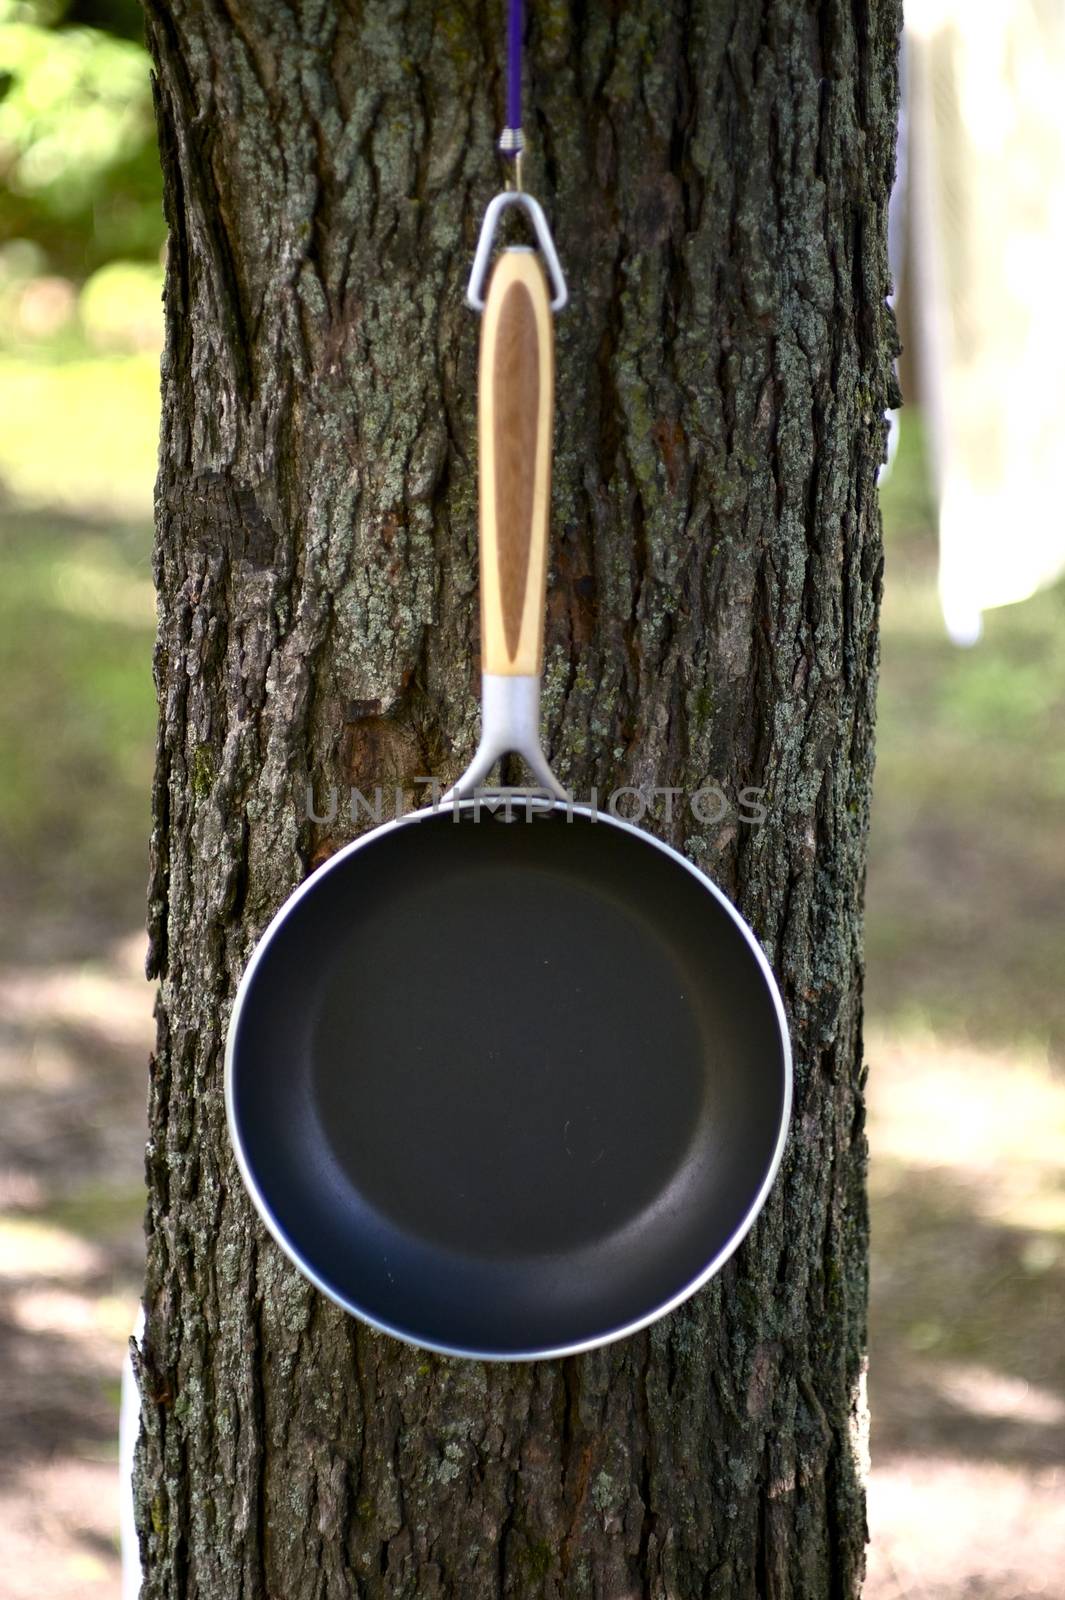 Frying Pan on Tree by welcomia